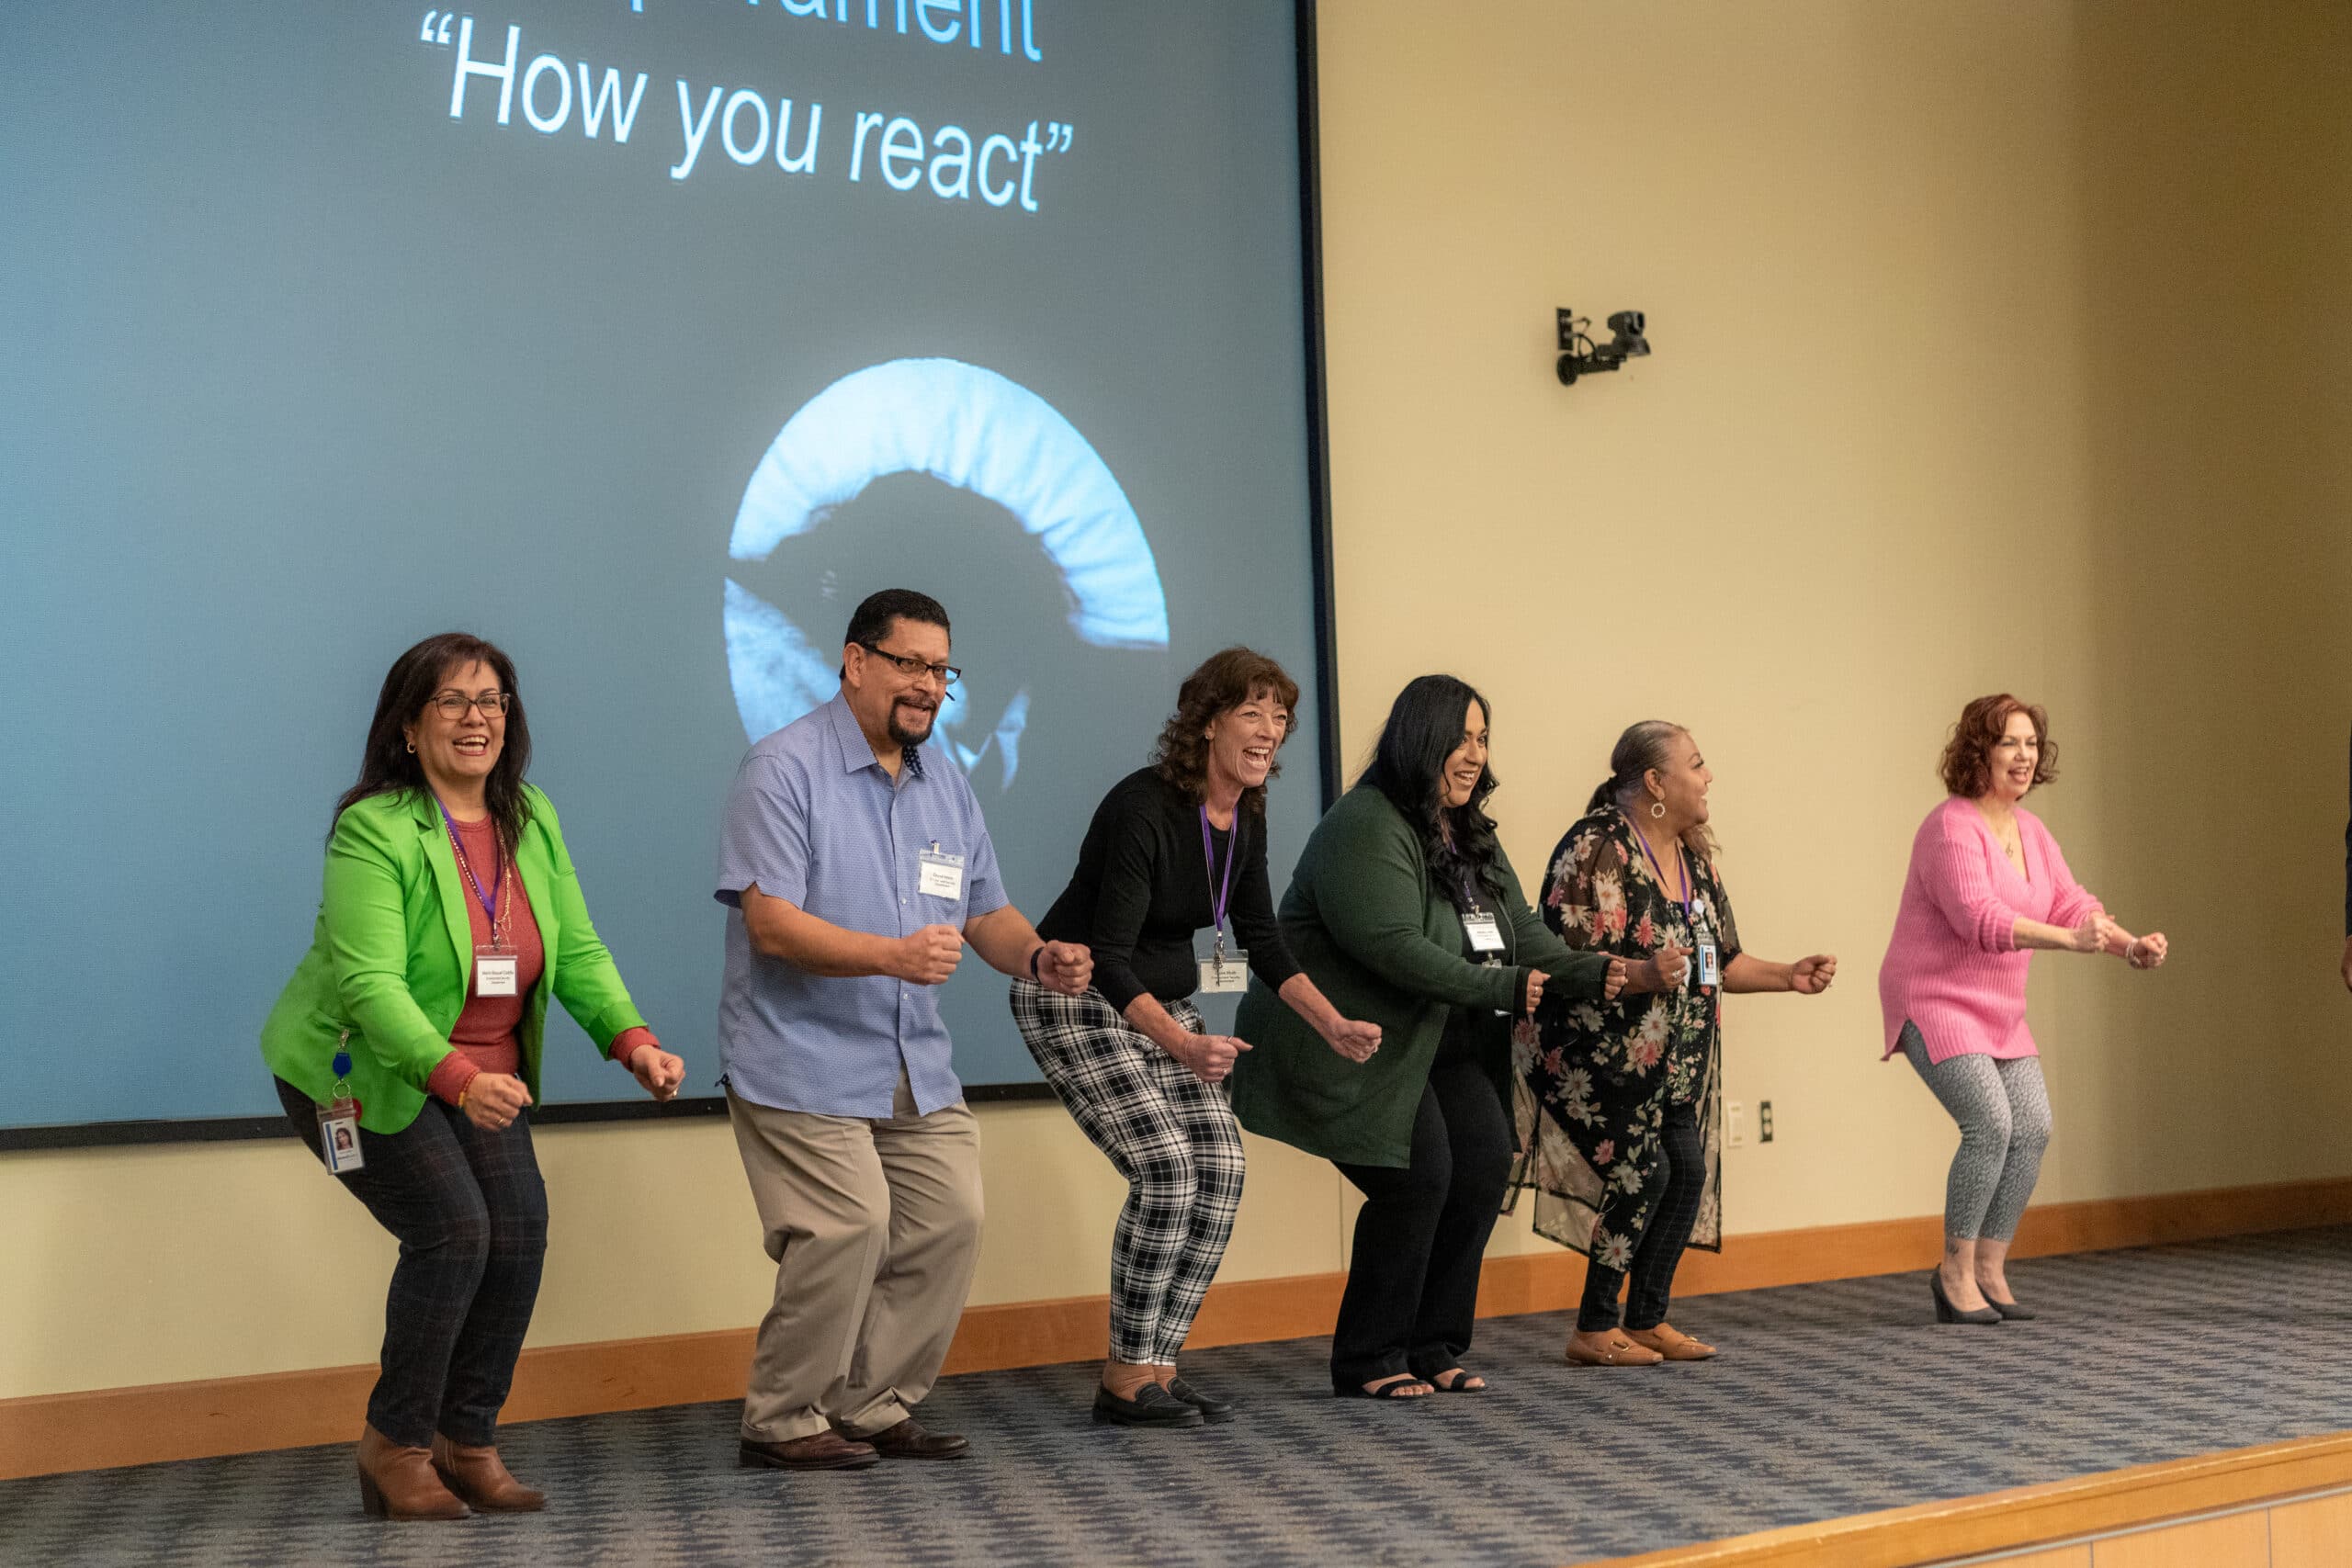 Event attendees participate in a fun exercise on stage.